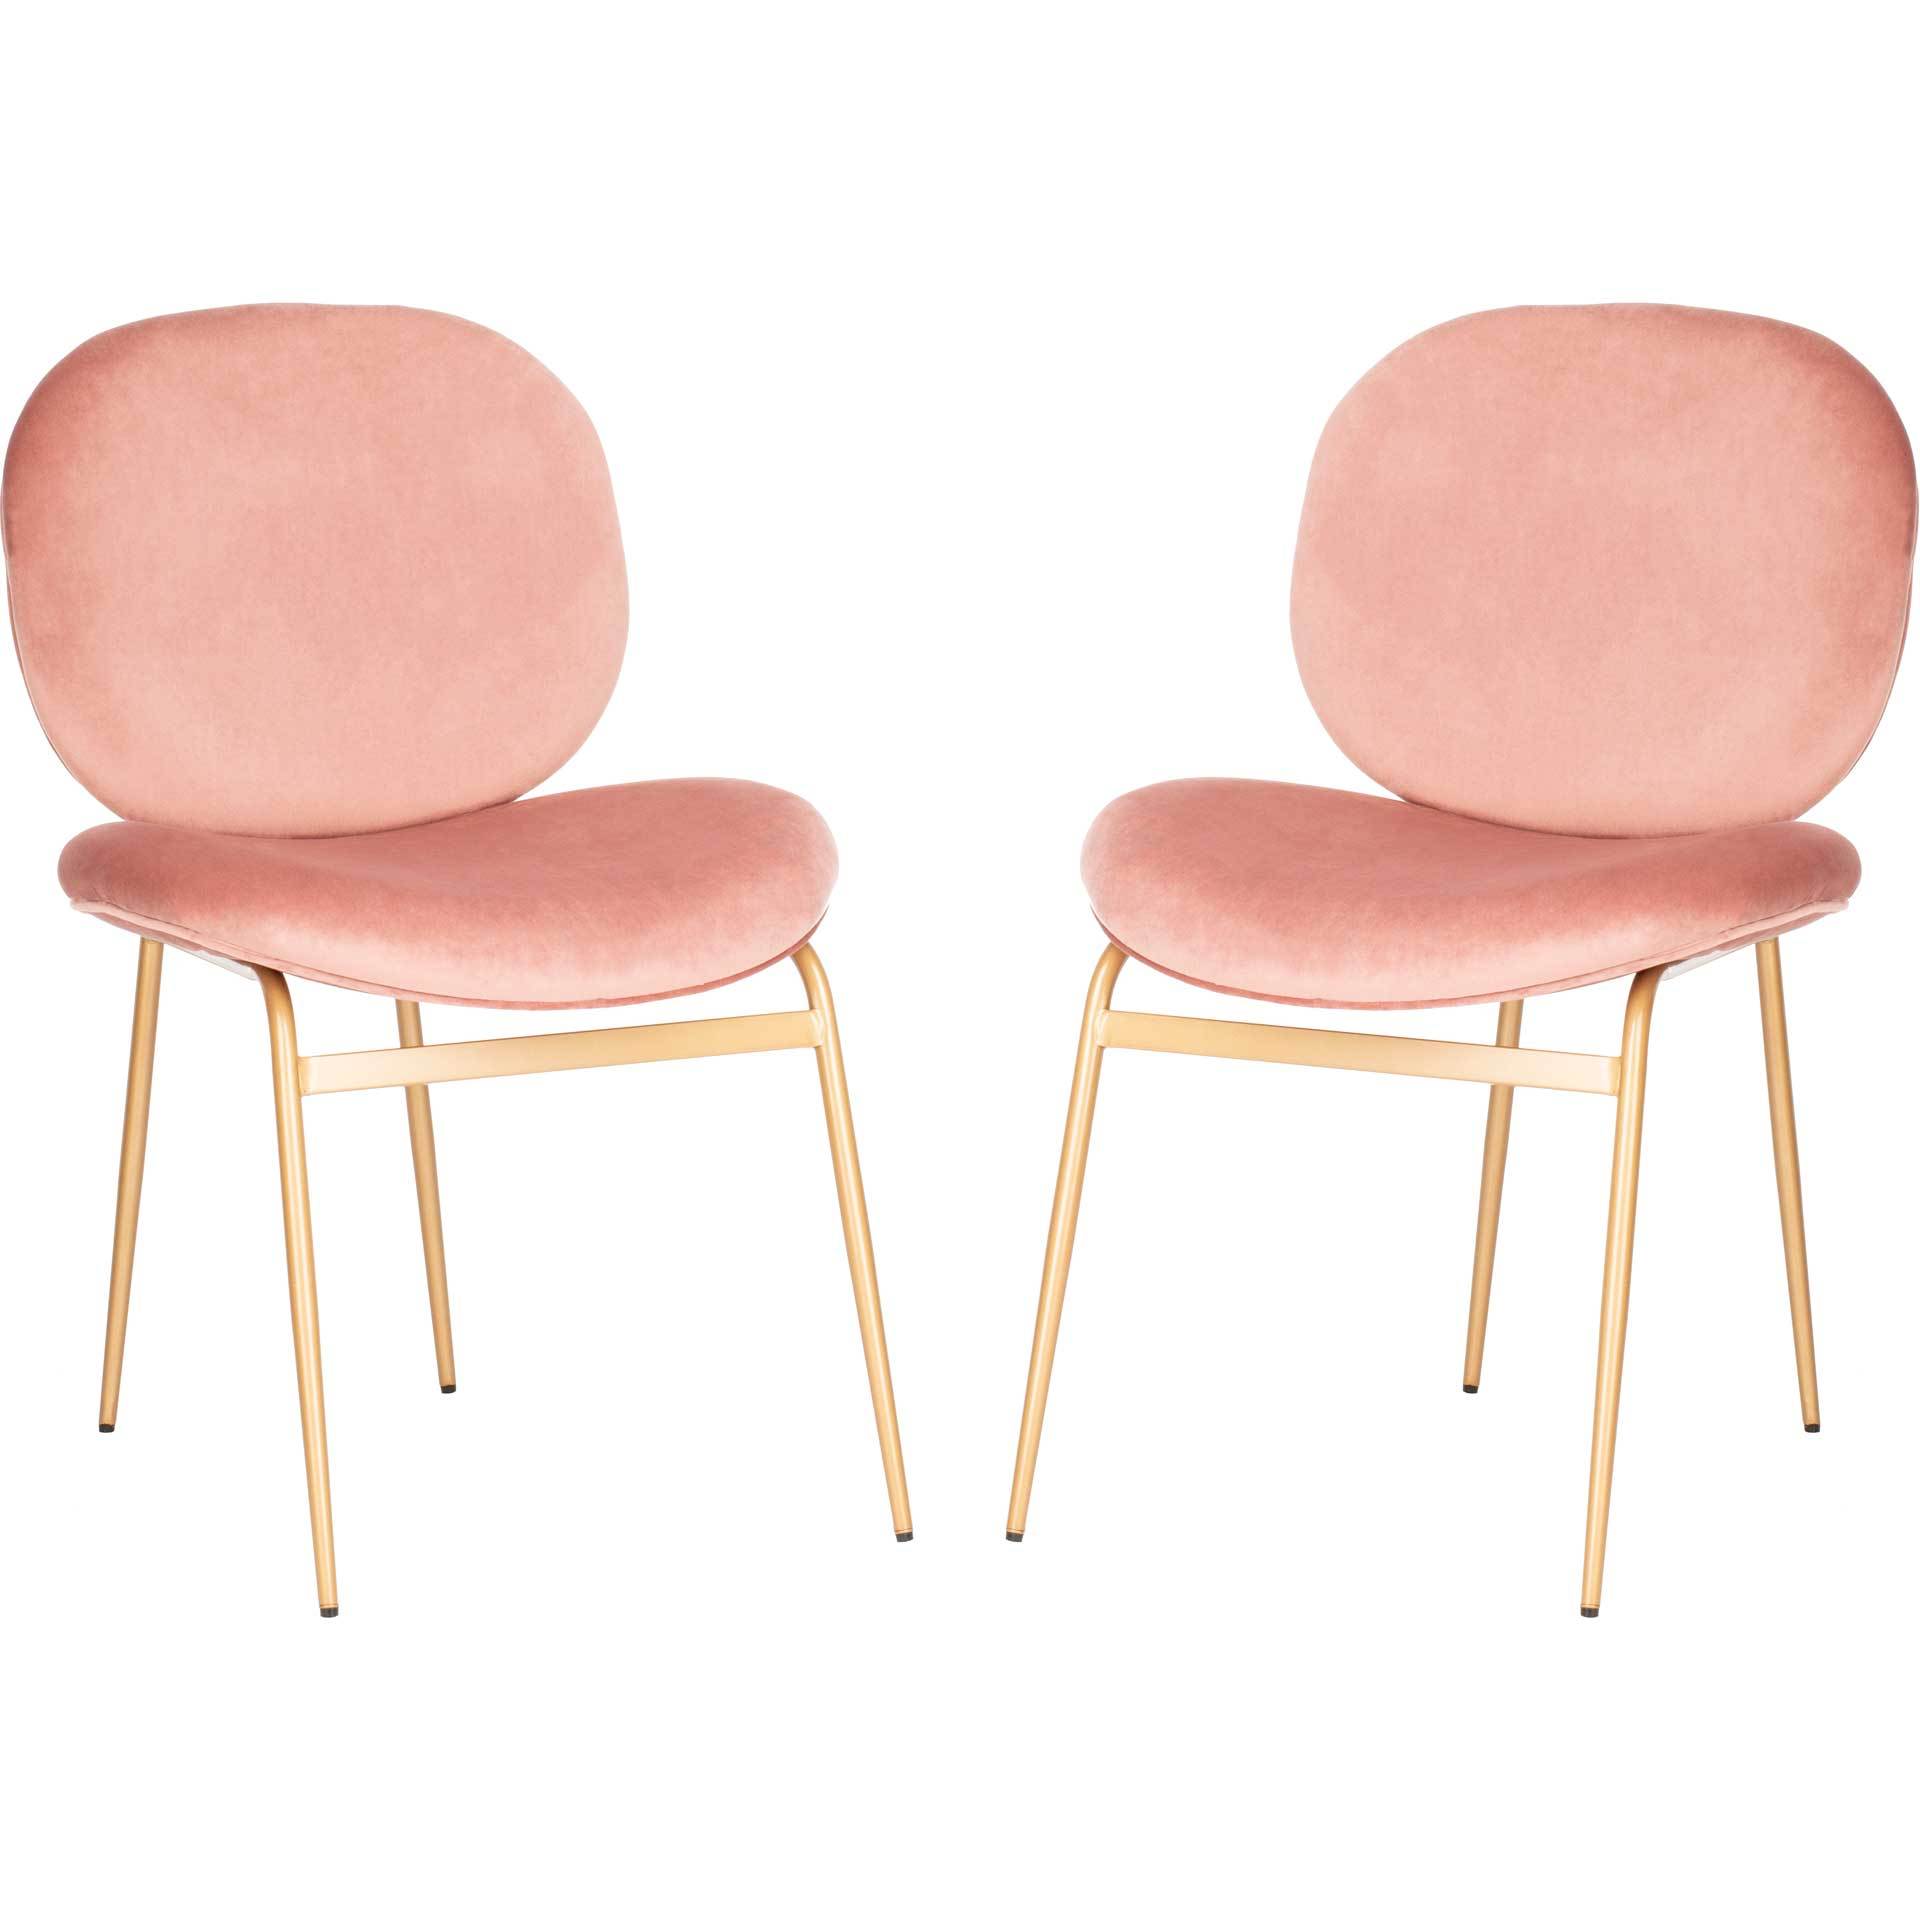 Jorden Round Side Chair Dusty Rose/Gold (Set of 2)